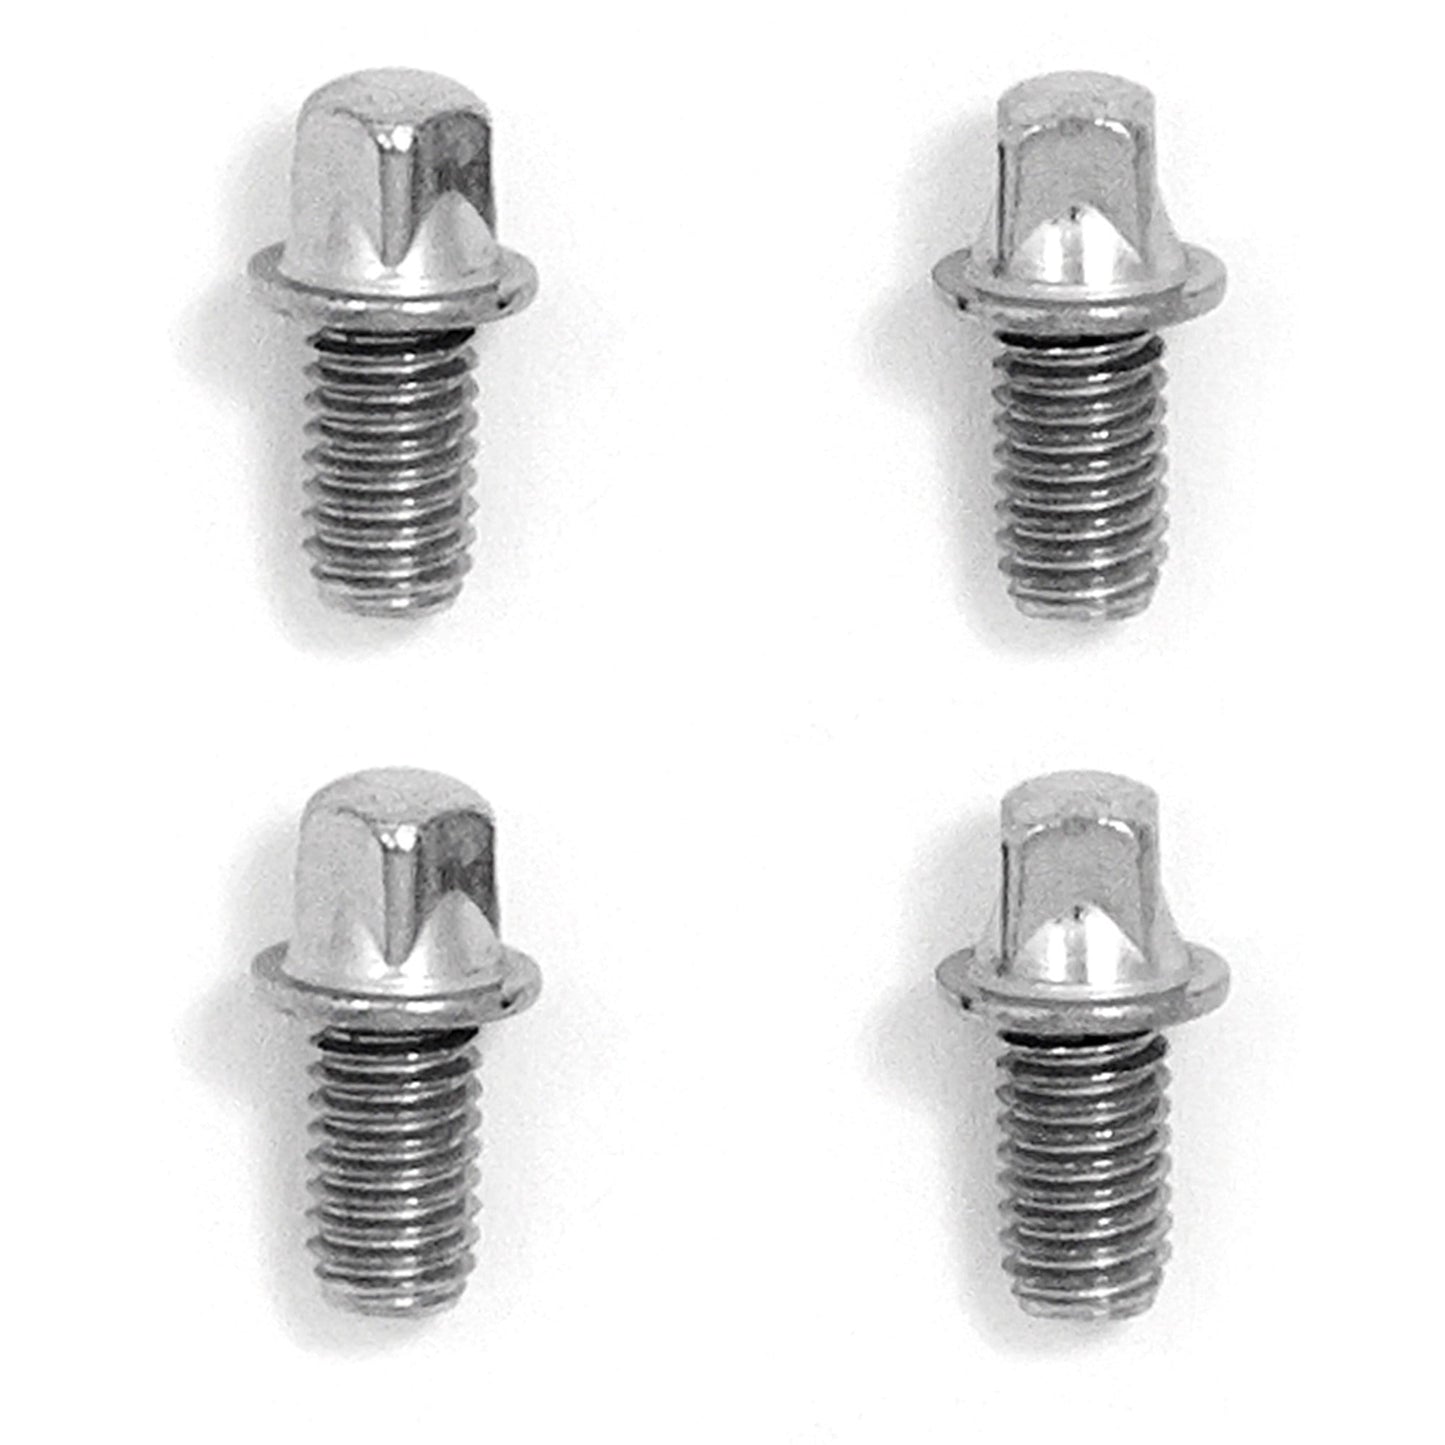 Gibraltar 6mm Key Screw for U-Joint (16 Pack Bundle) Drums and Percussion / Parts and Accessories / Drum Parts